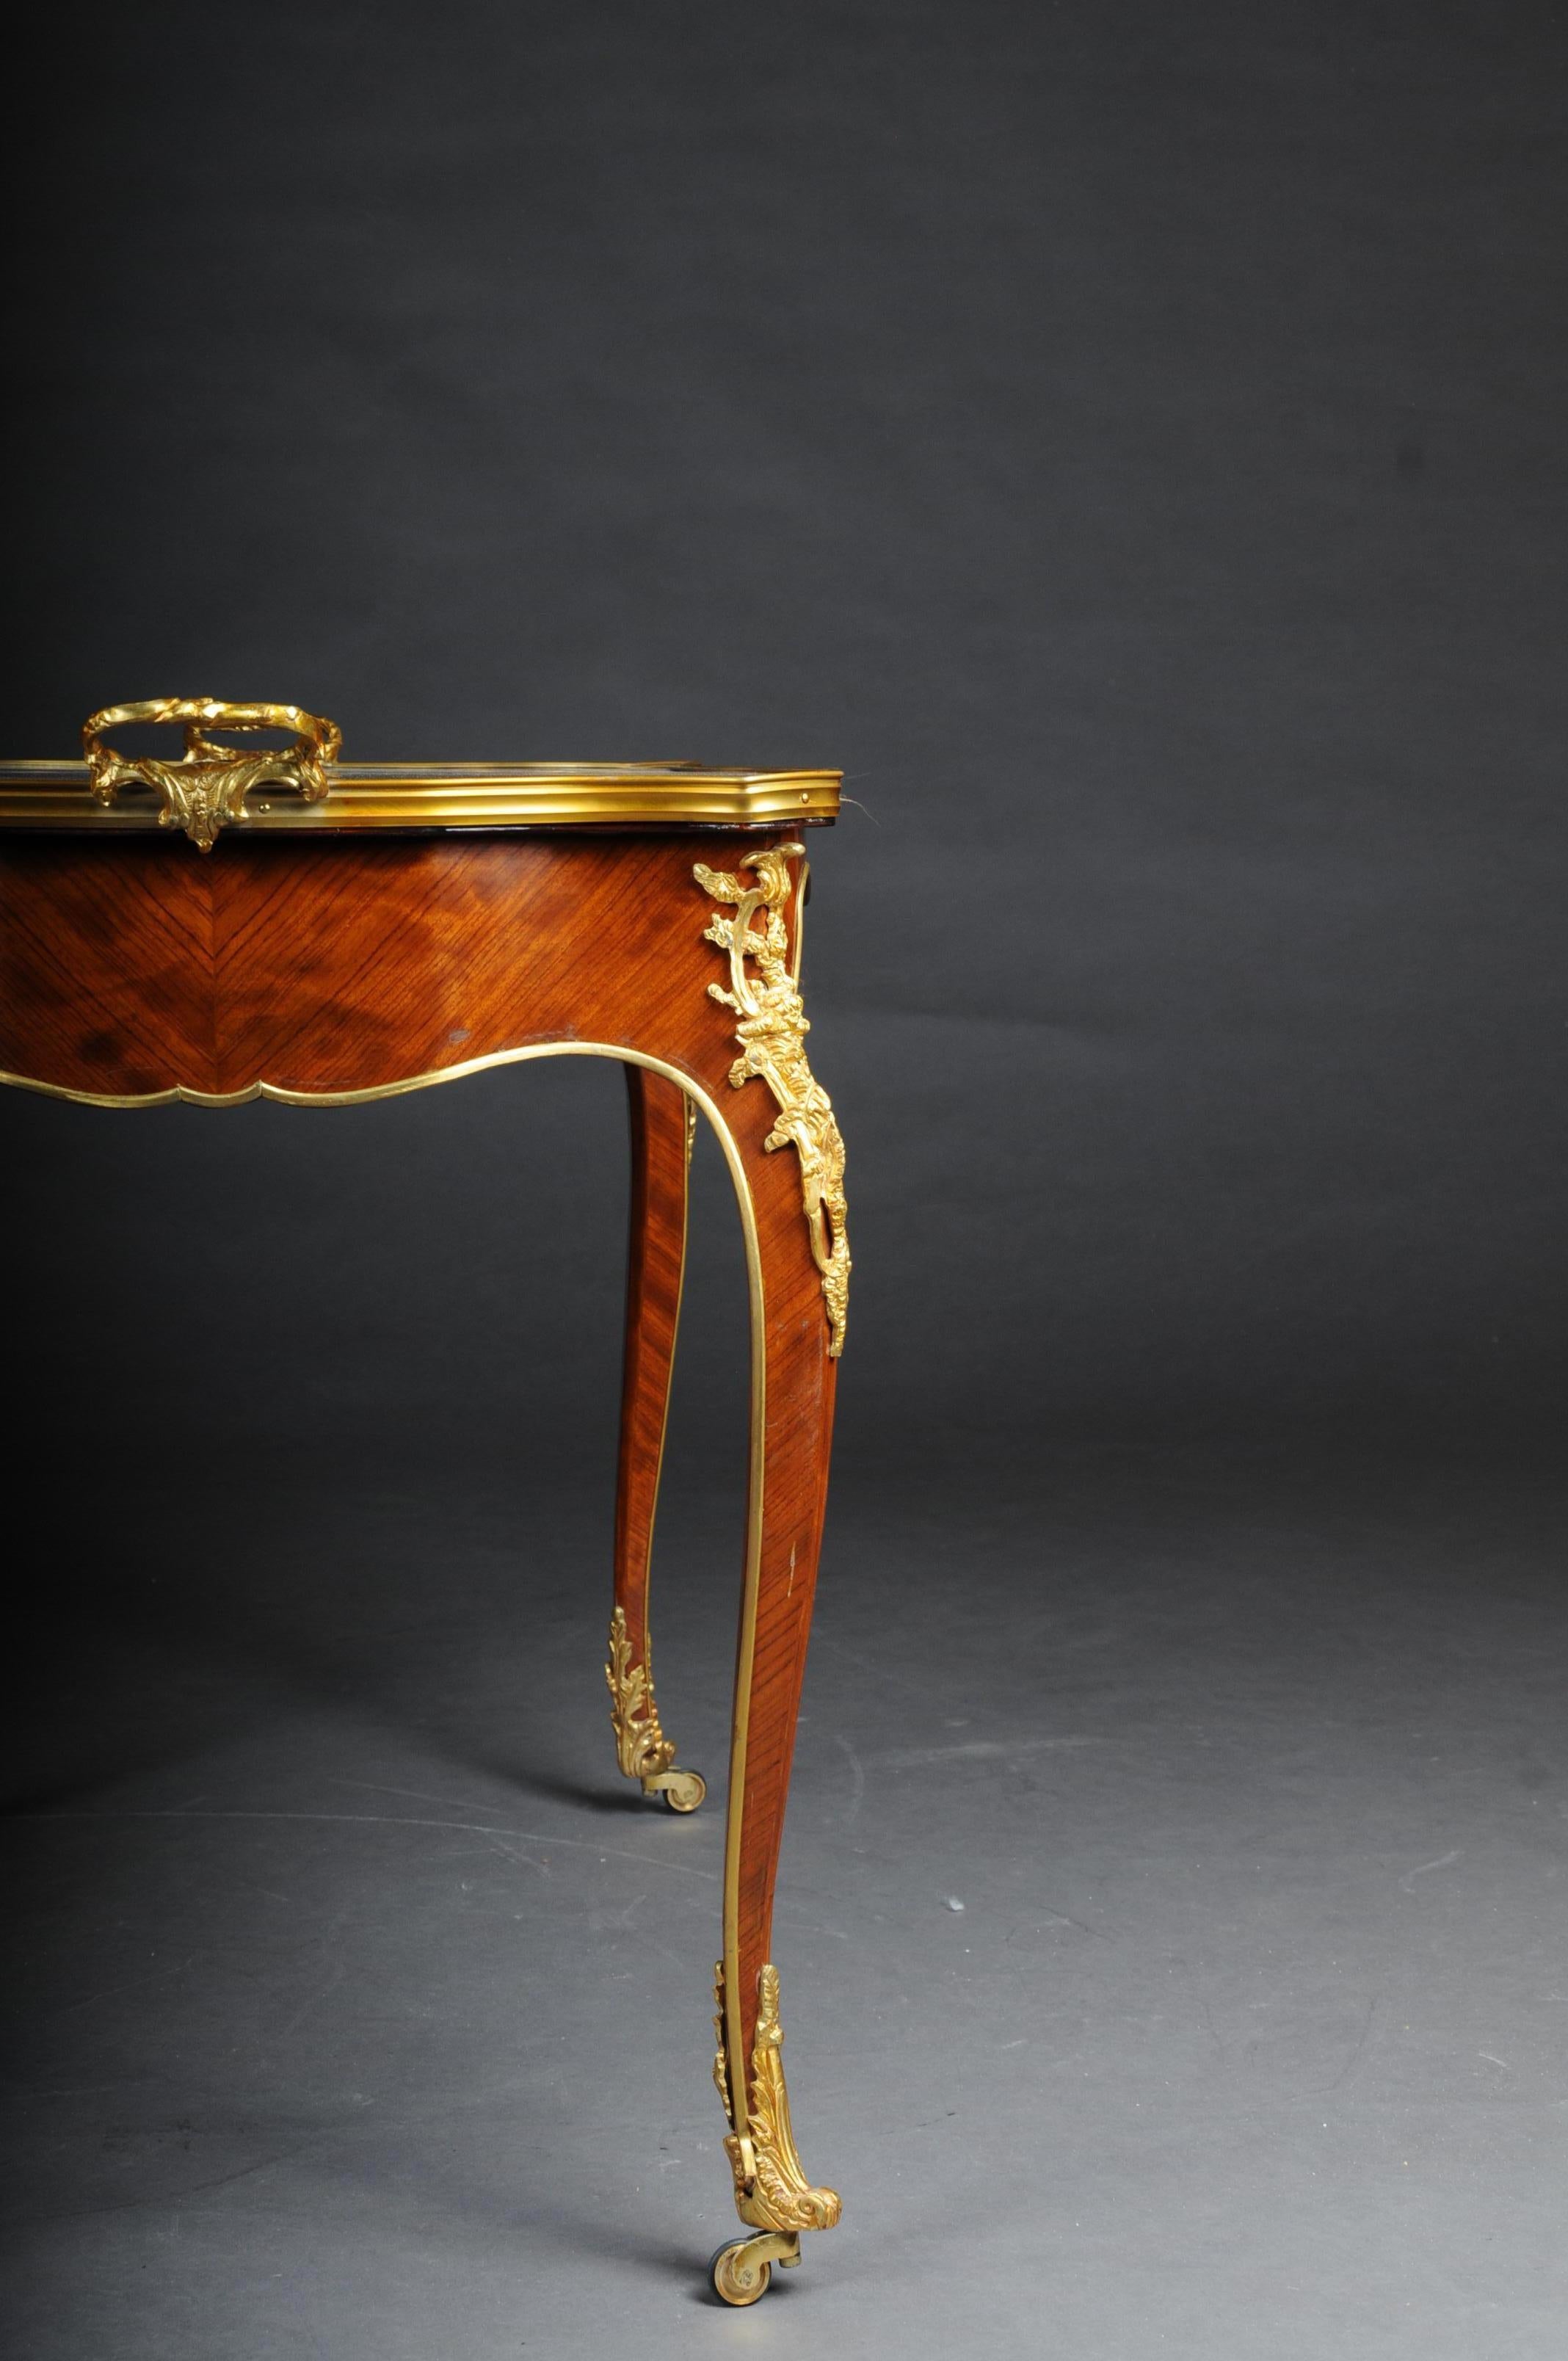 Elegant French Salon Table in Louis Quinze Style 1